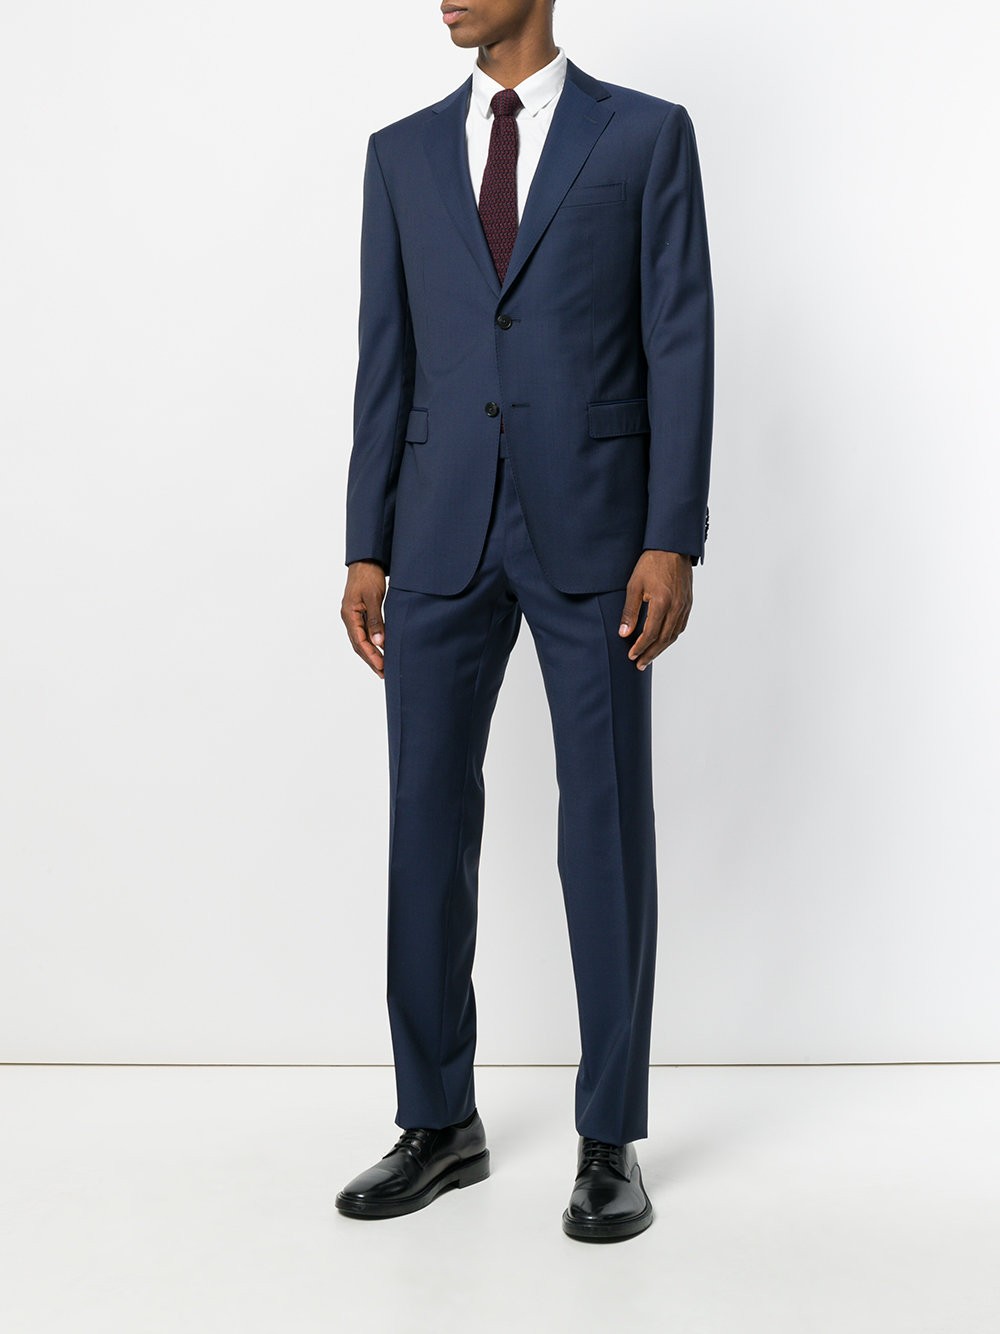 Z Zegna Suit Navy Blue 32274128 QCGN - New Collection Spring Summer 2018